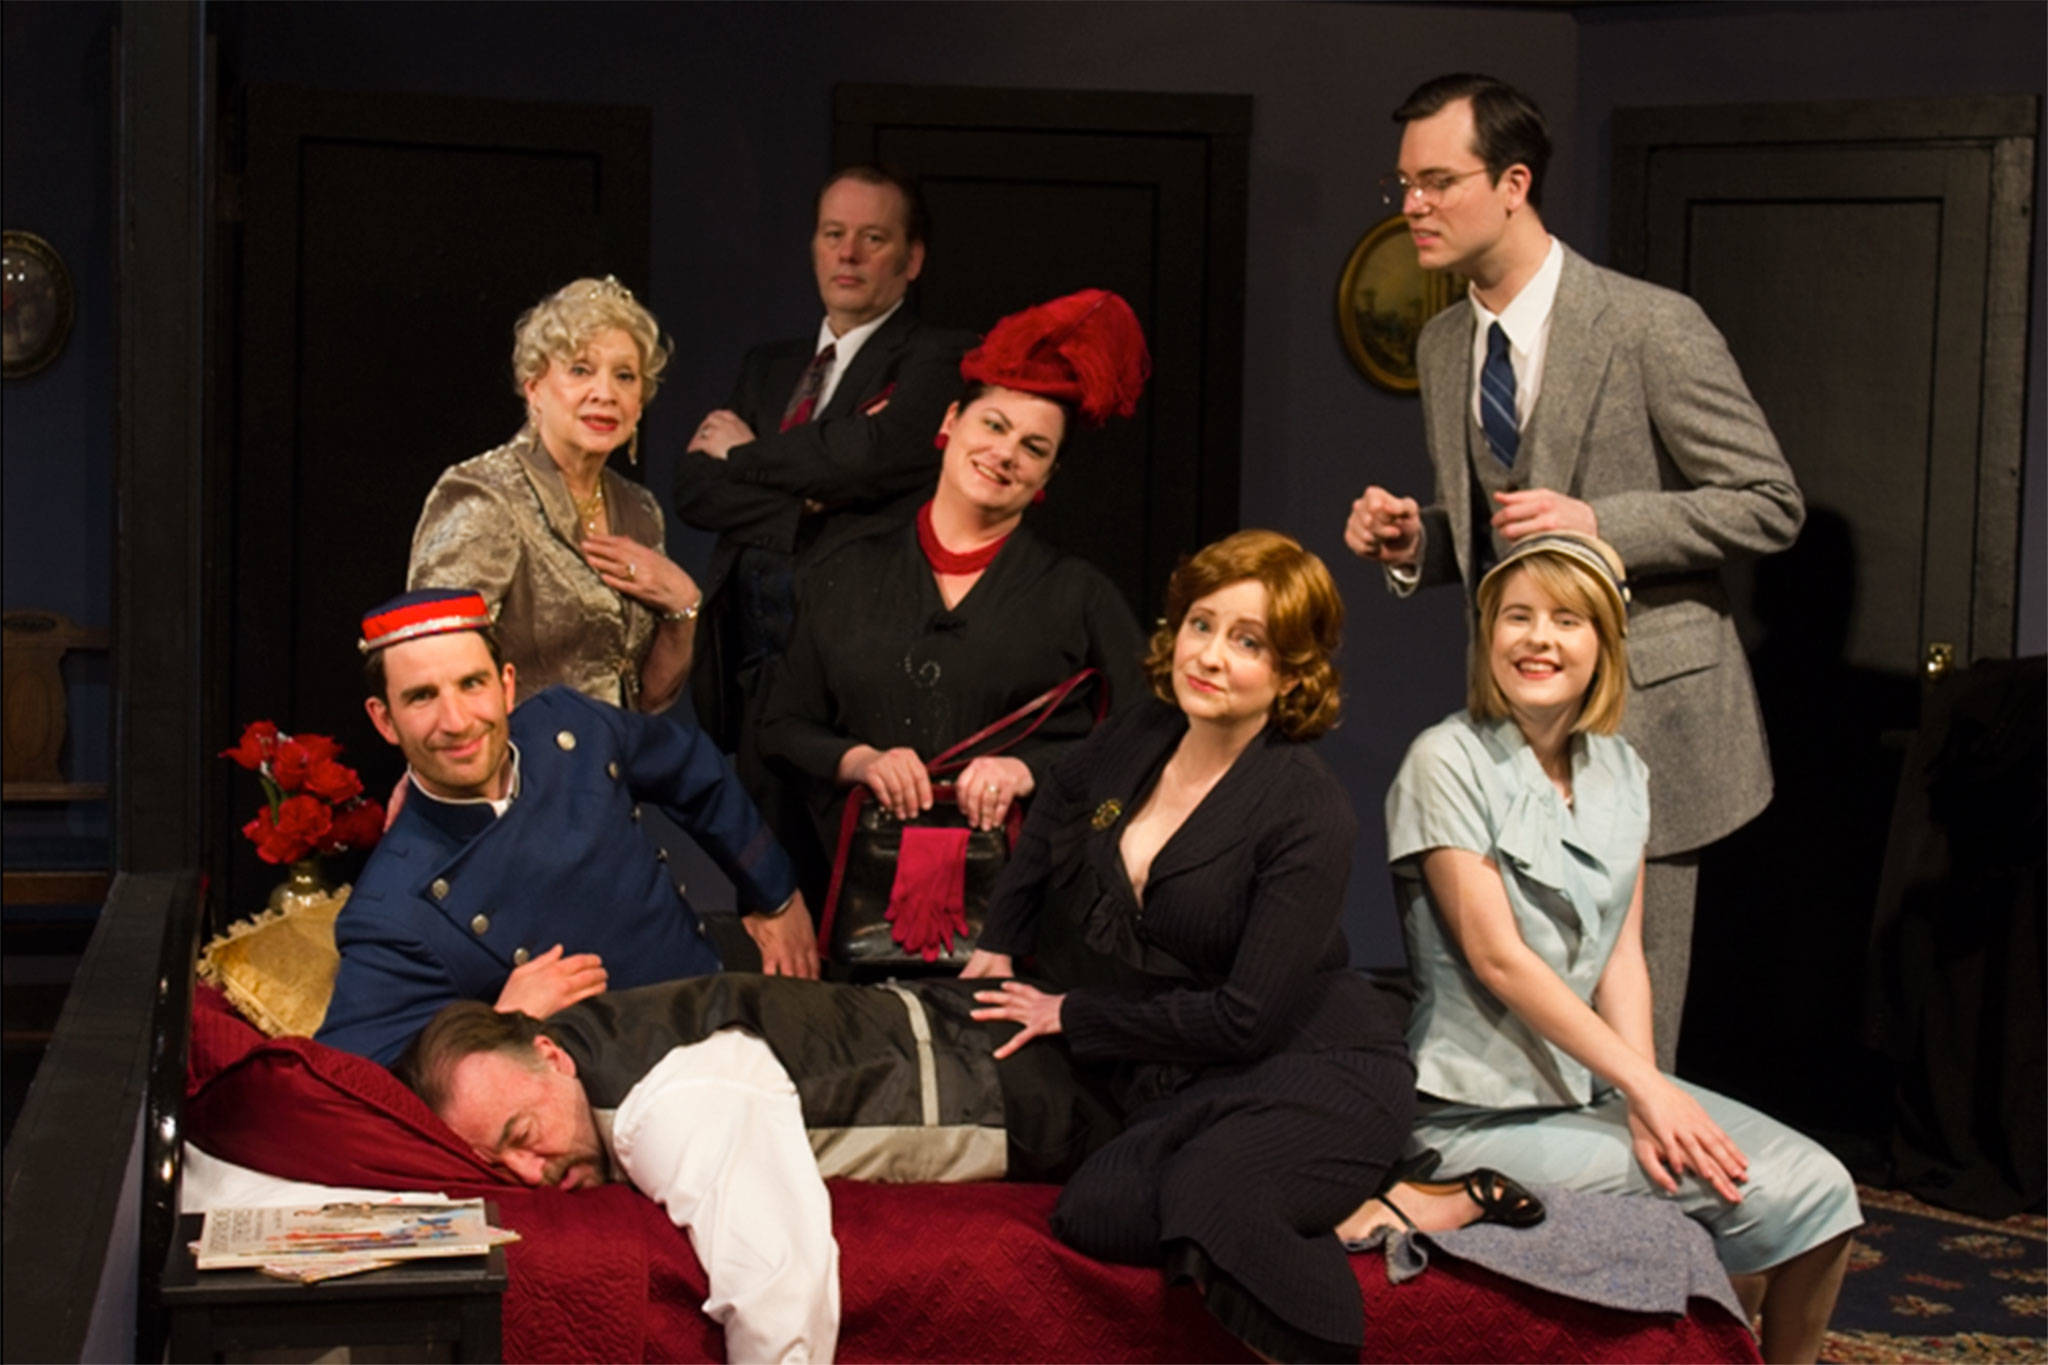 The cast of “Lend Me a Tenor” features from front left, Ron Graham (sleeping), Josh McLean, Angela Poynter, Alison Cobb; and back left, Kathy Balducci, Richard Stephens, Jennifer Saul and Randy Powell.